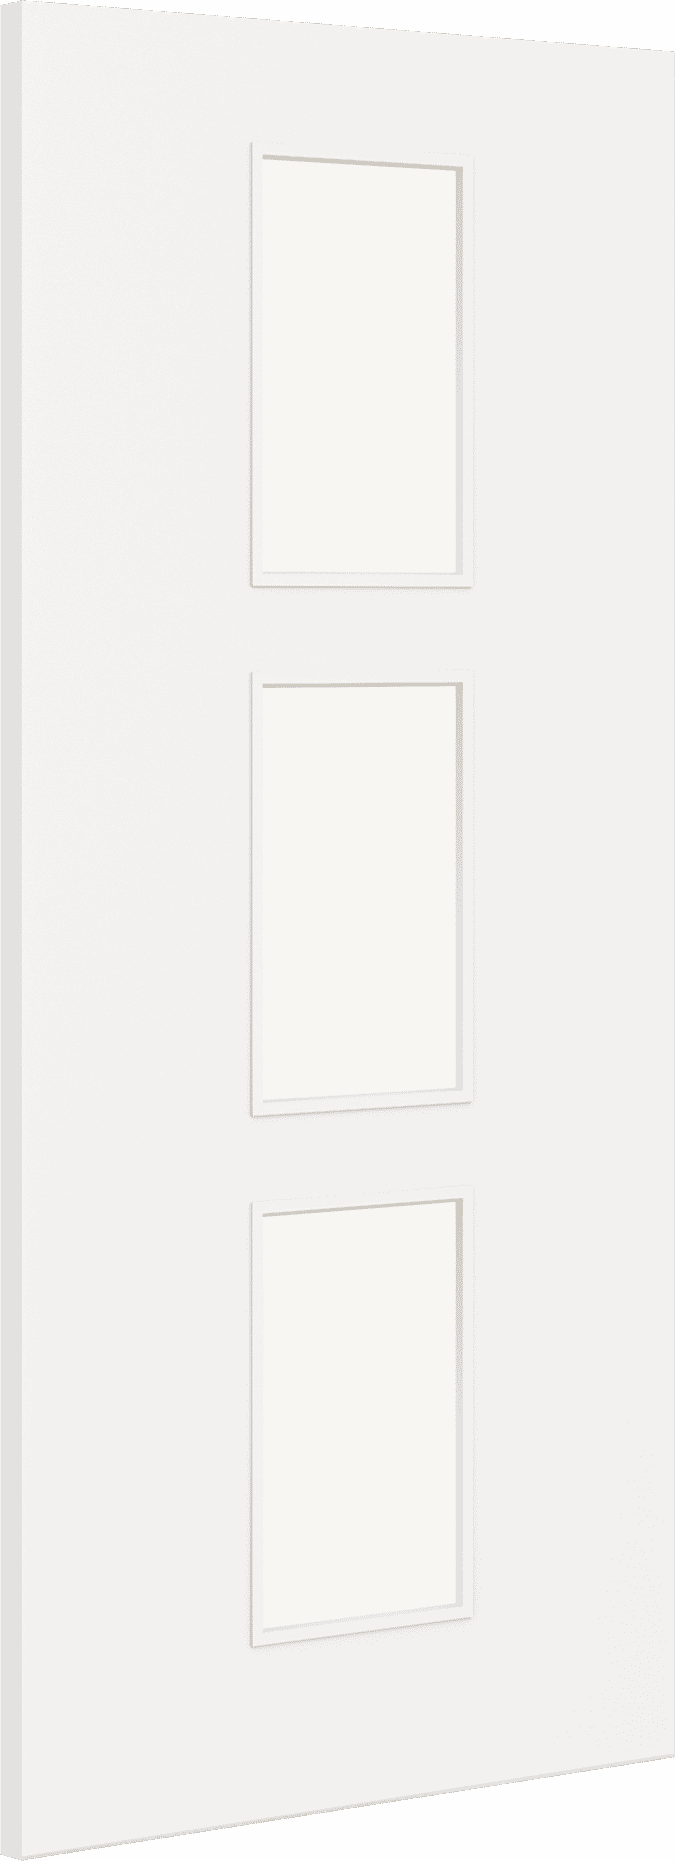 2040mm x 926mm x 44mm Architectural Paint Grade White 11 Frosted Glazed Fire Door Blank